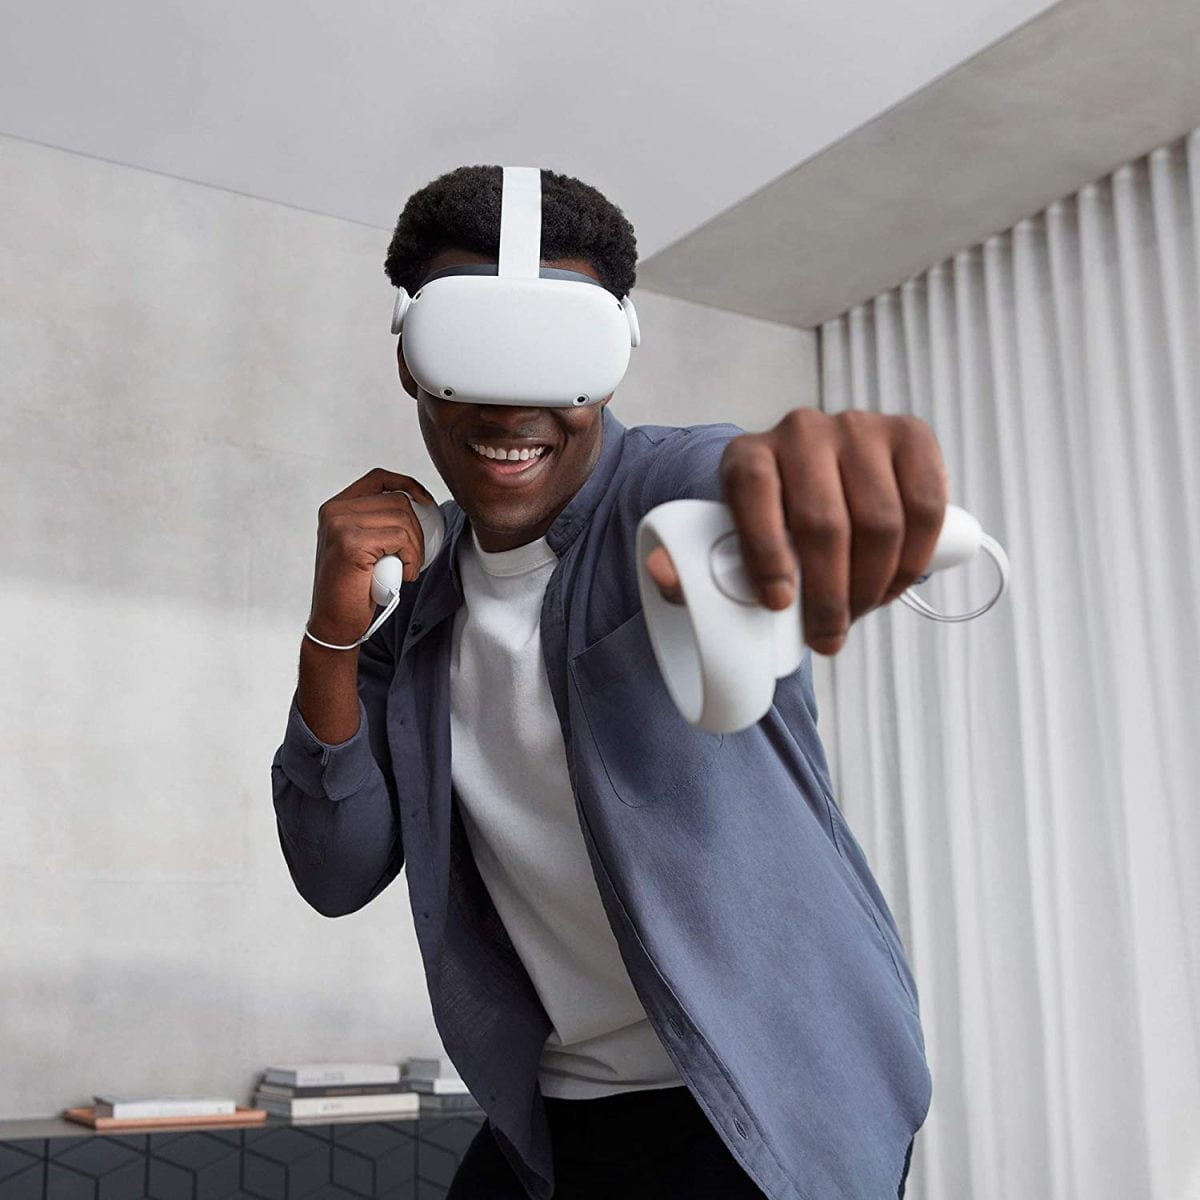 Https://Youtu.be/Atvgl9Wojsm Oculus Quest 2 Oculus Quest 2 — Advanced All-In-One Virtual Reality Headset — 64 Gb